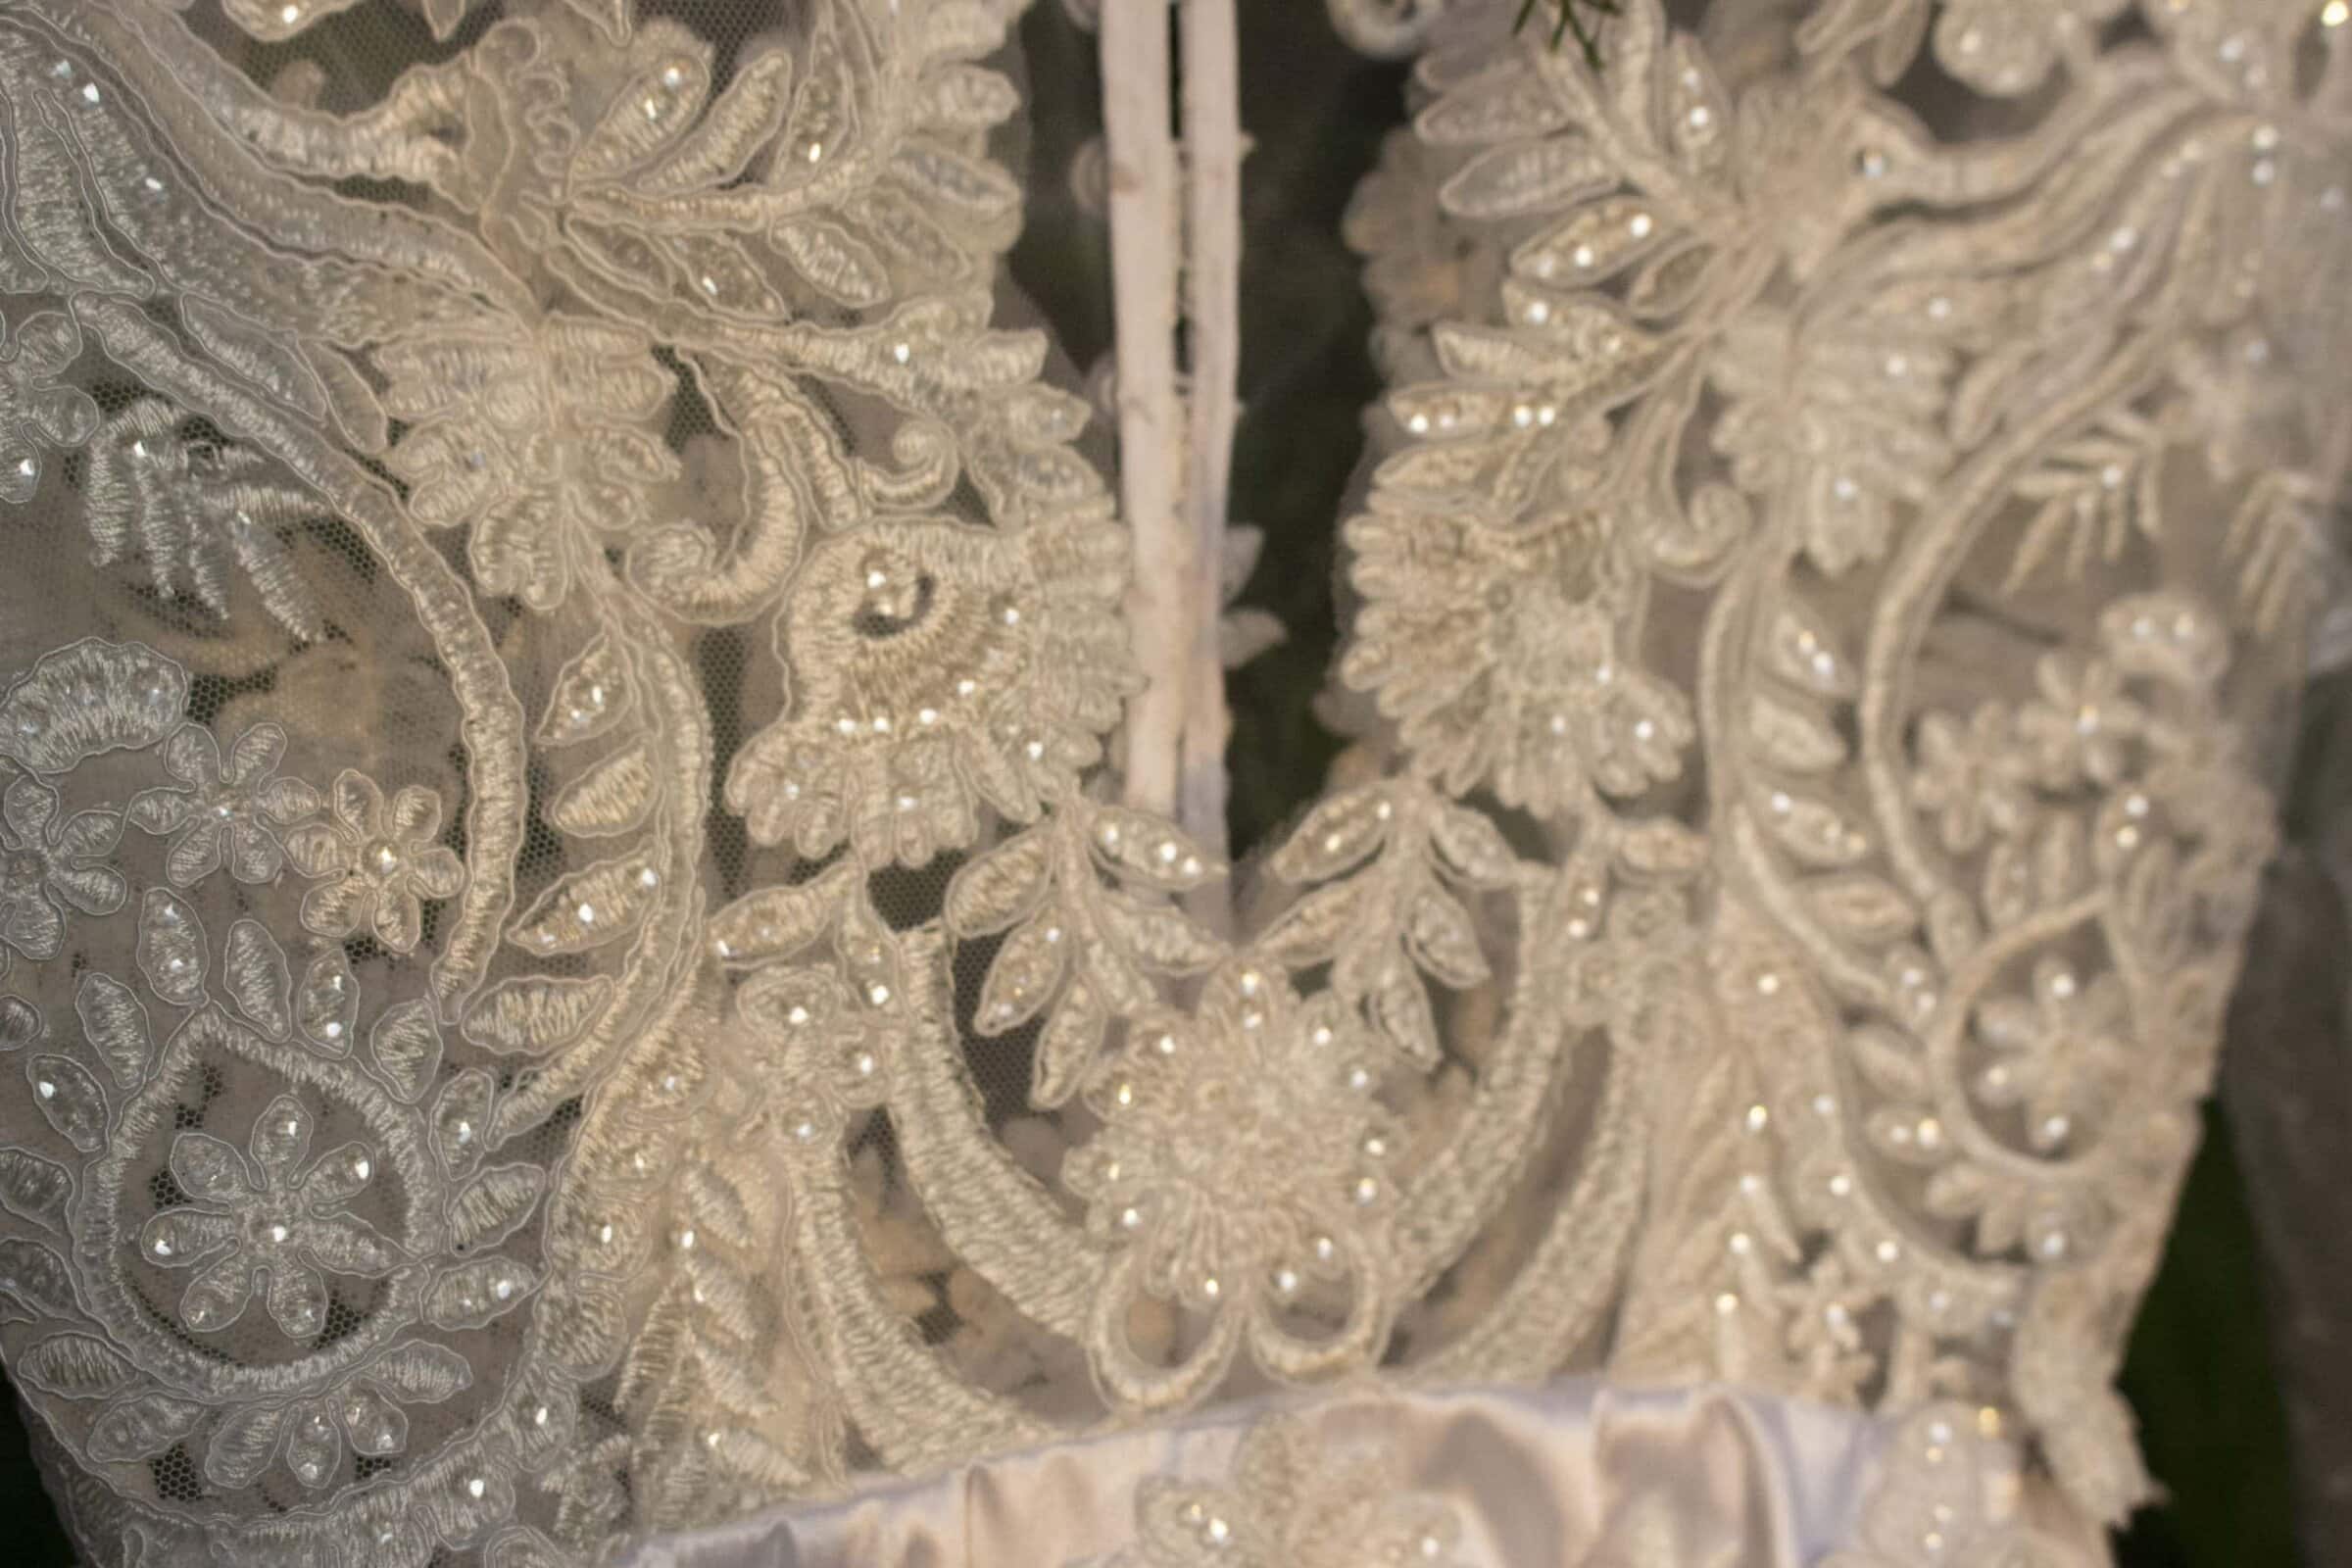 Detail of wedding gown from Kendy Manzano's final collection